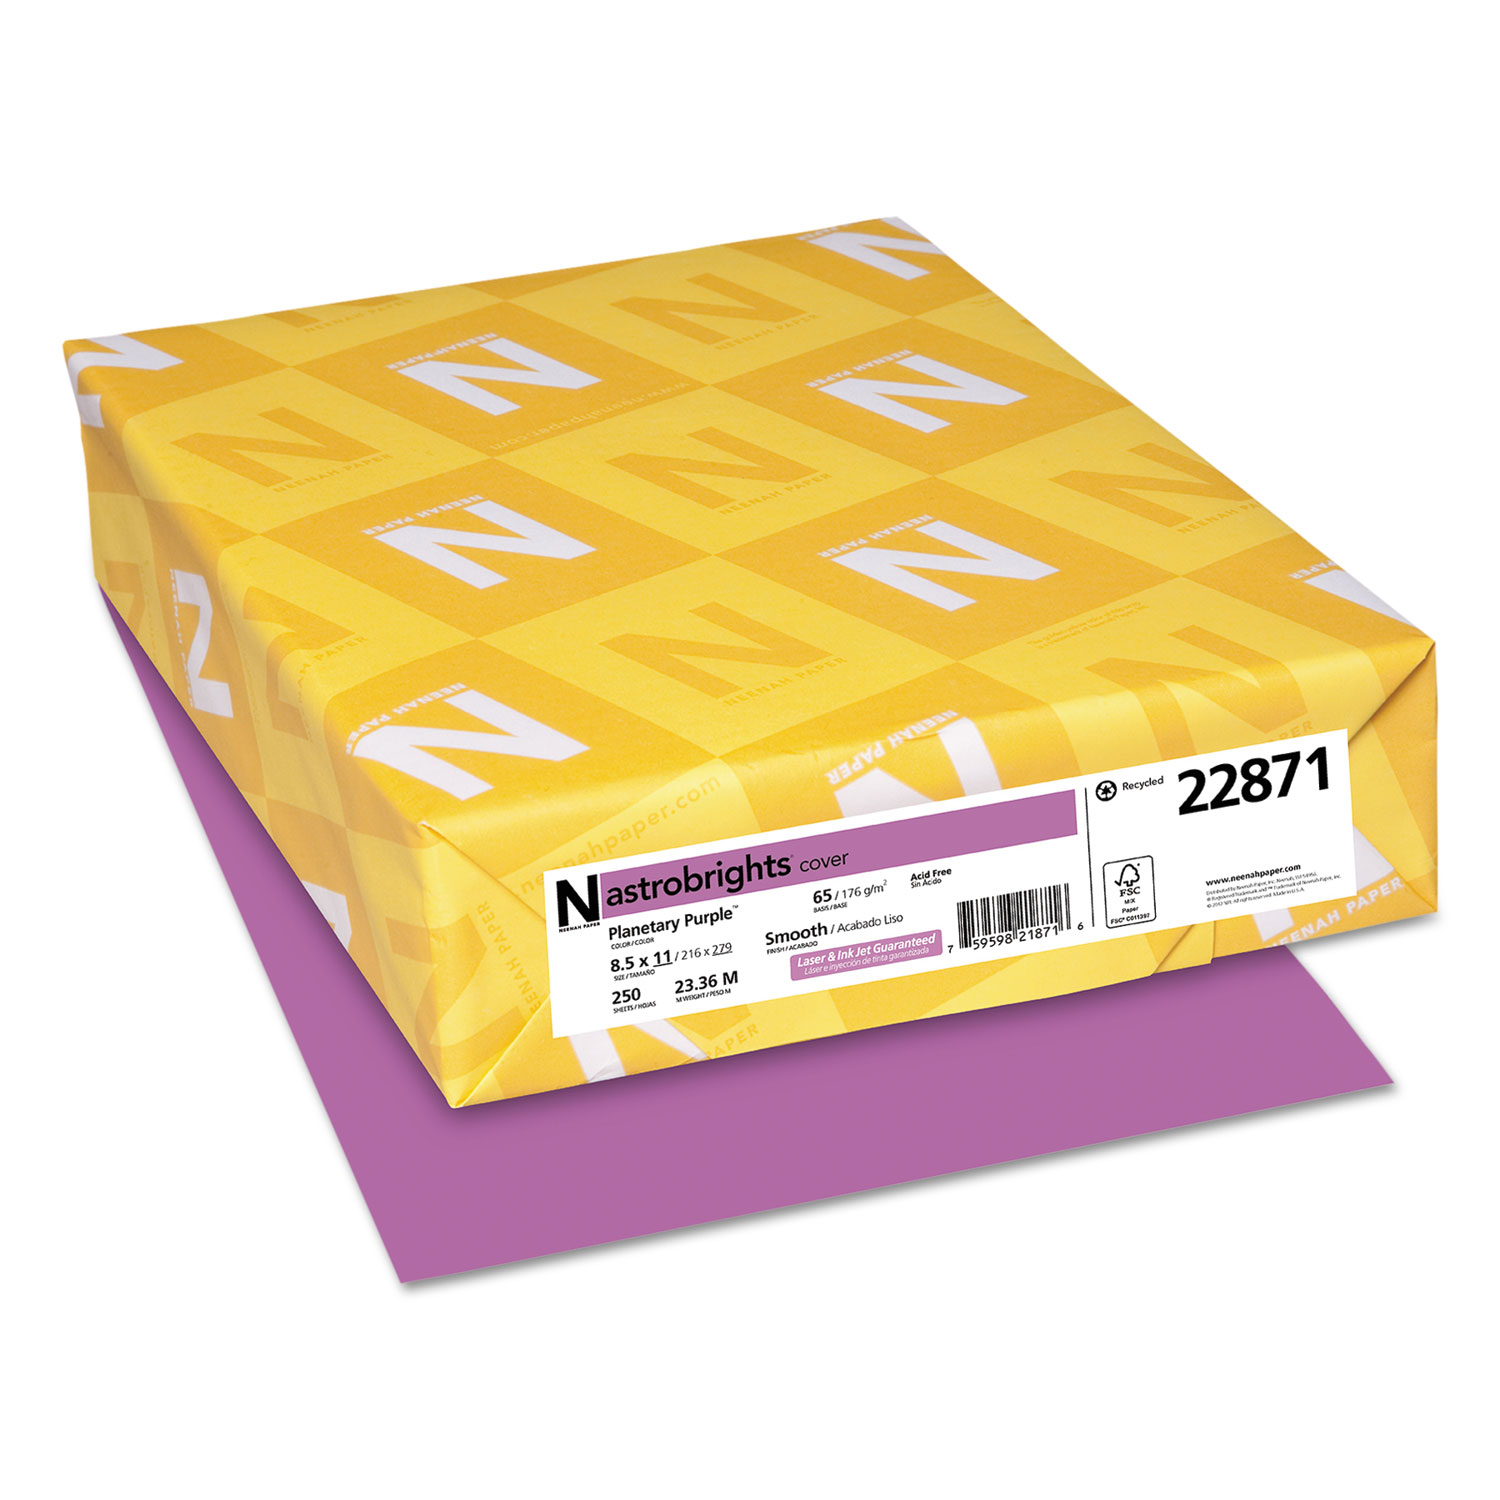  Astrobrights 22871 Color Cardstock, 65lb, 8.5 x 11, Planetary Purple, 250/Pack (WAU22871) 